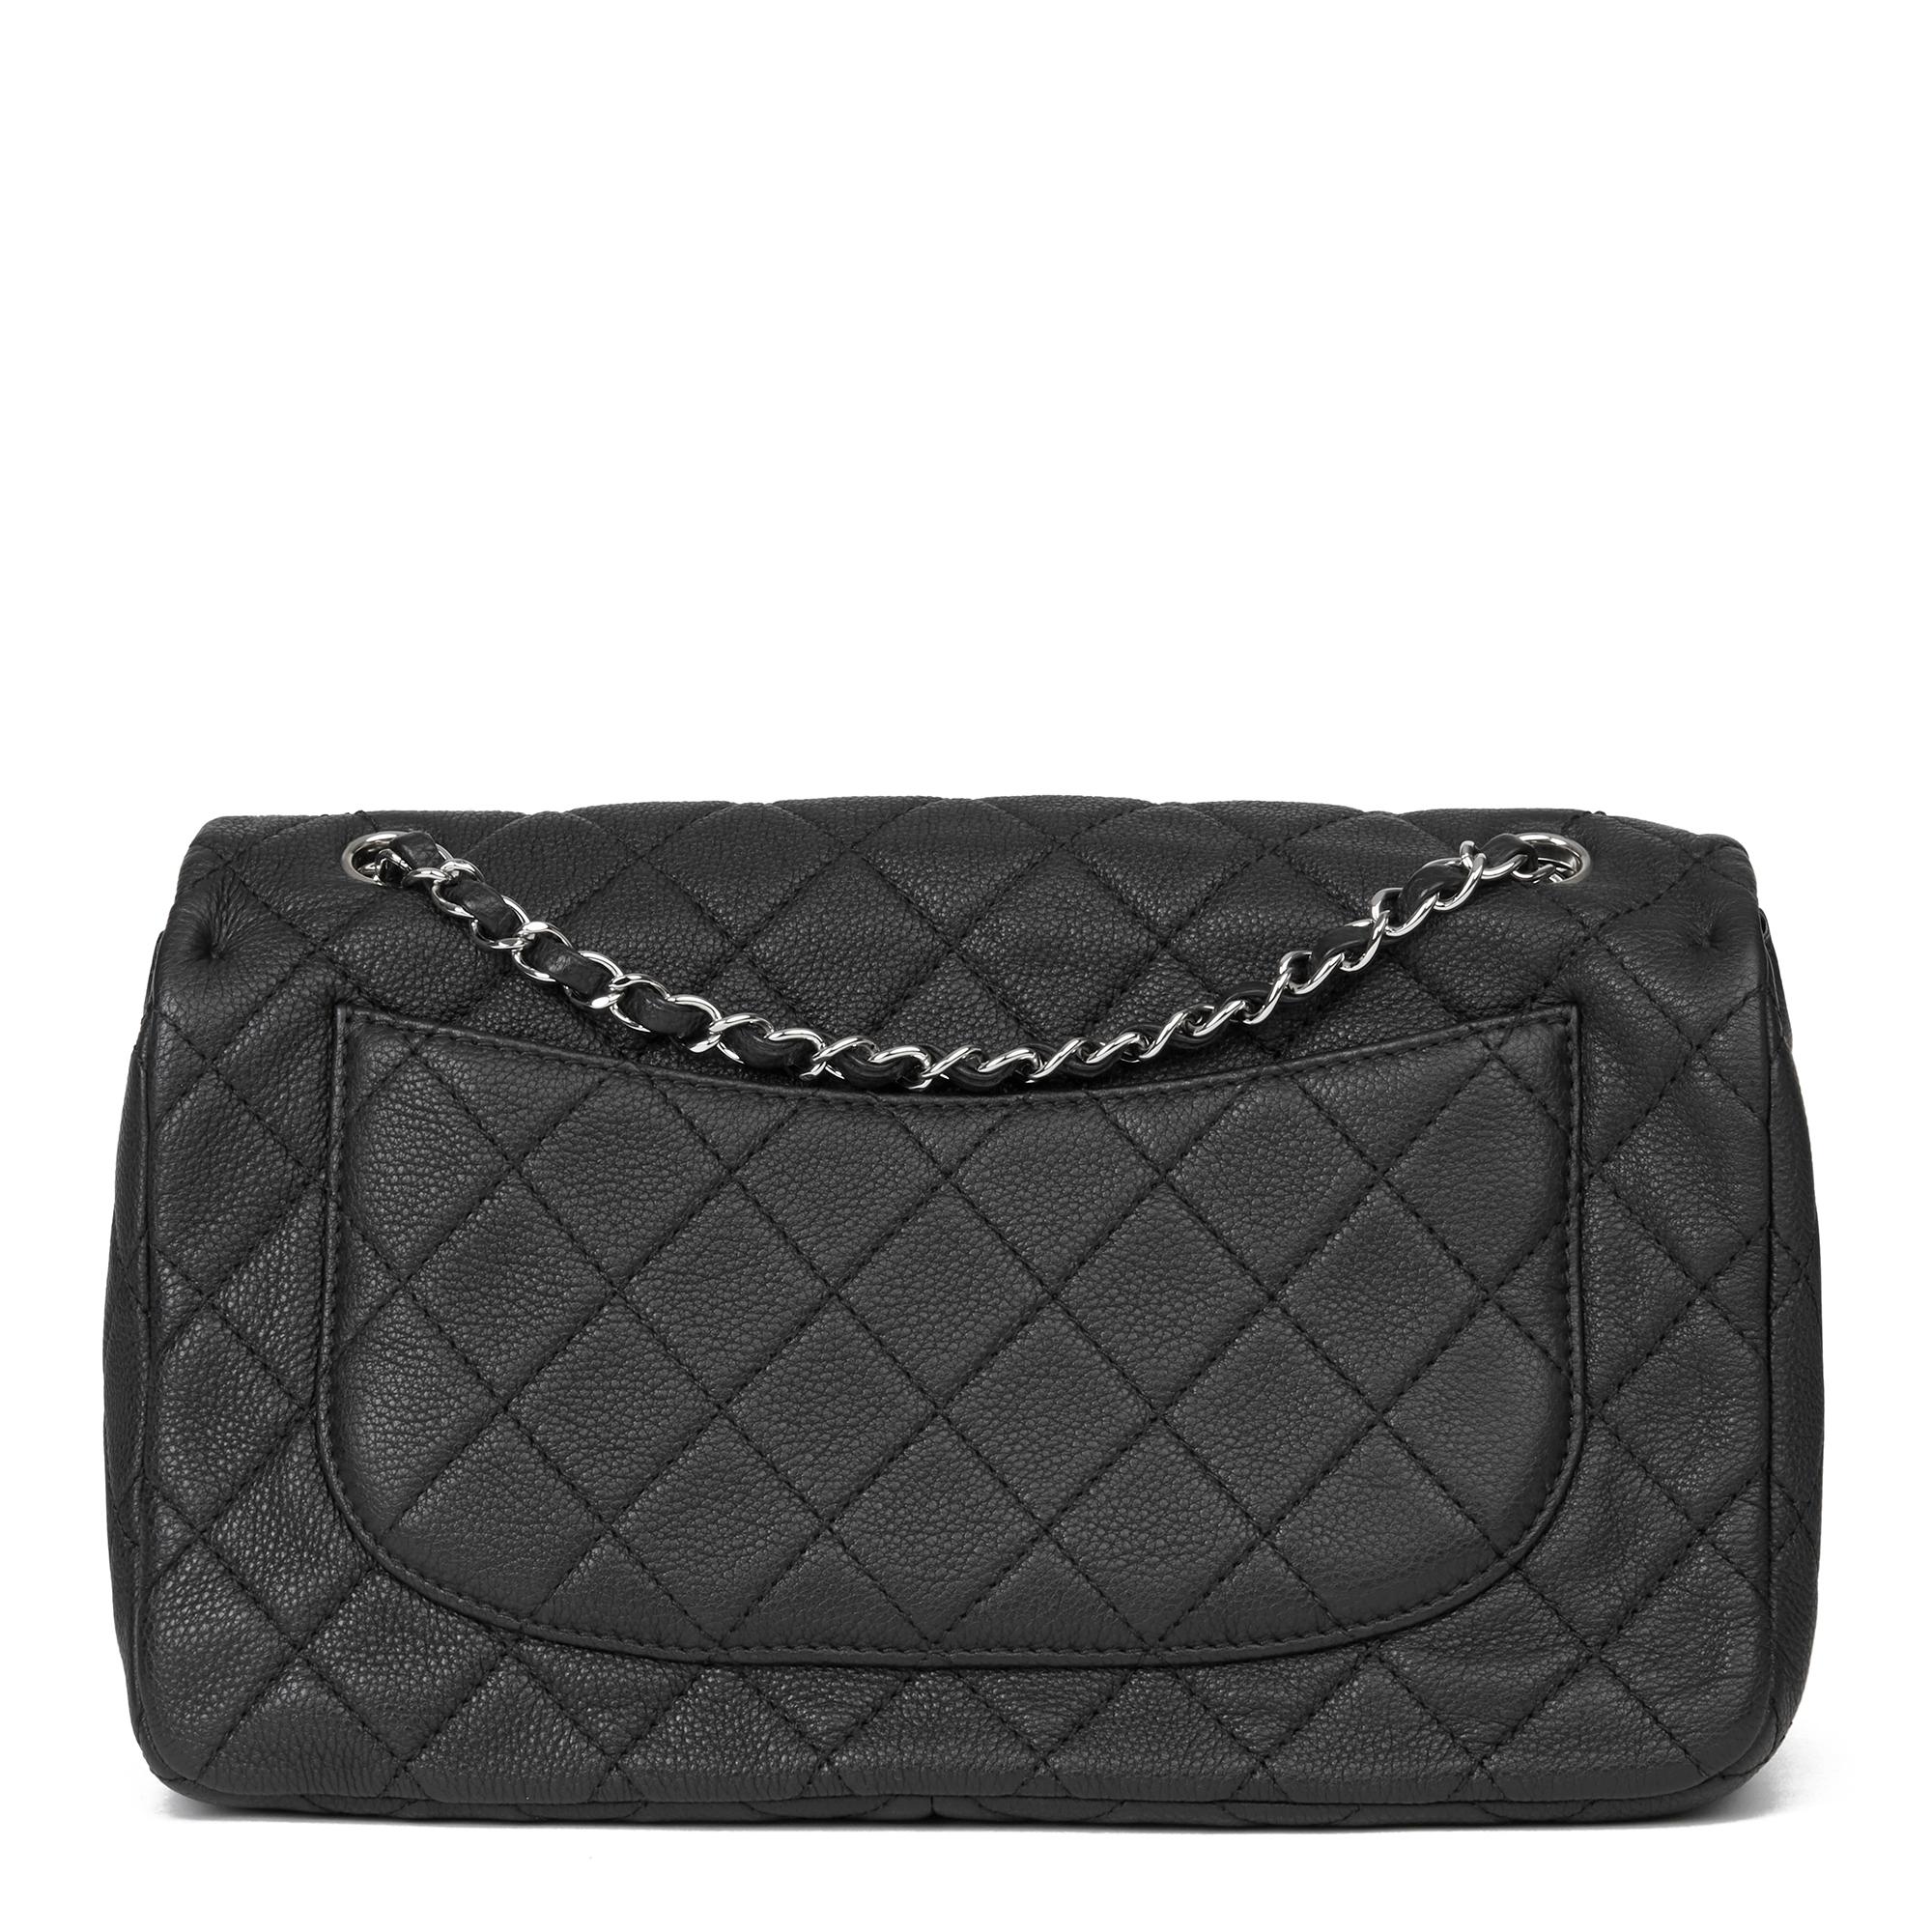 2013 Chanel Black Quilted Washed Caviar Leather Double Gusset Single Flap Bag 1